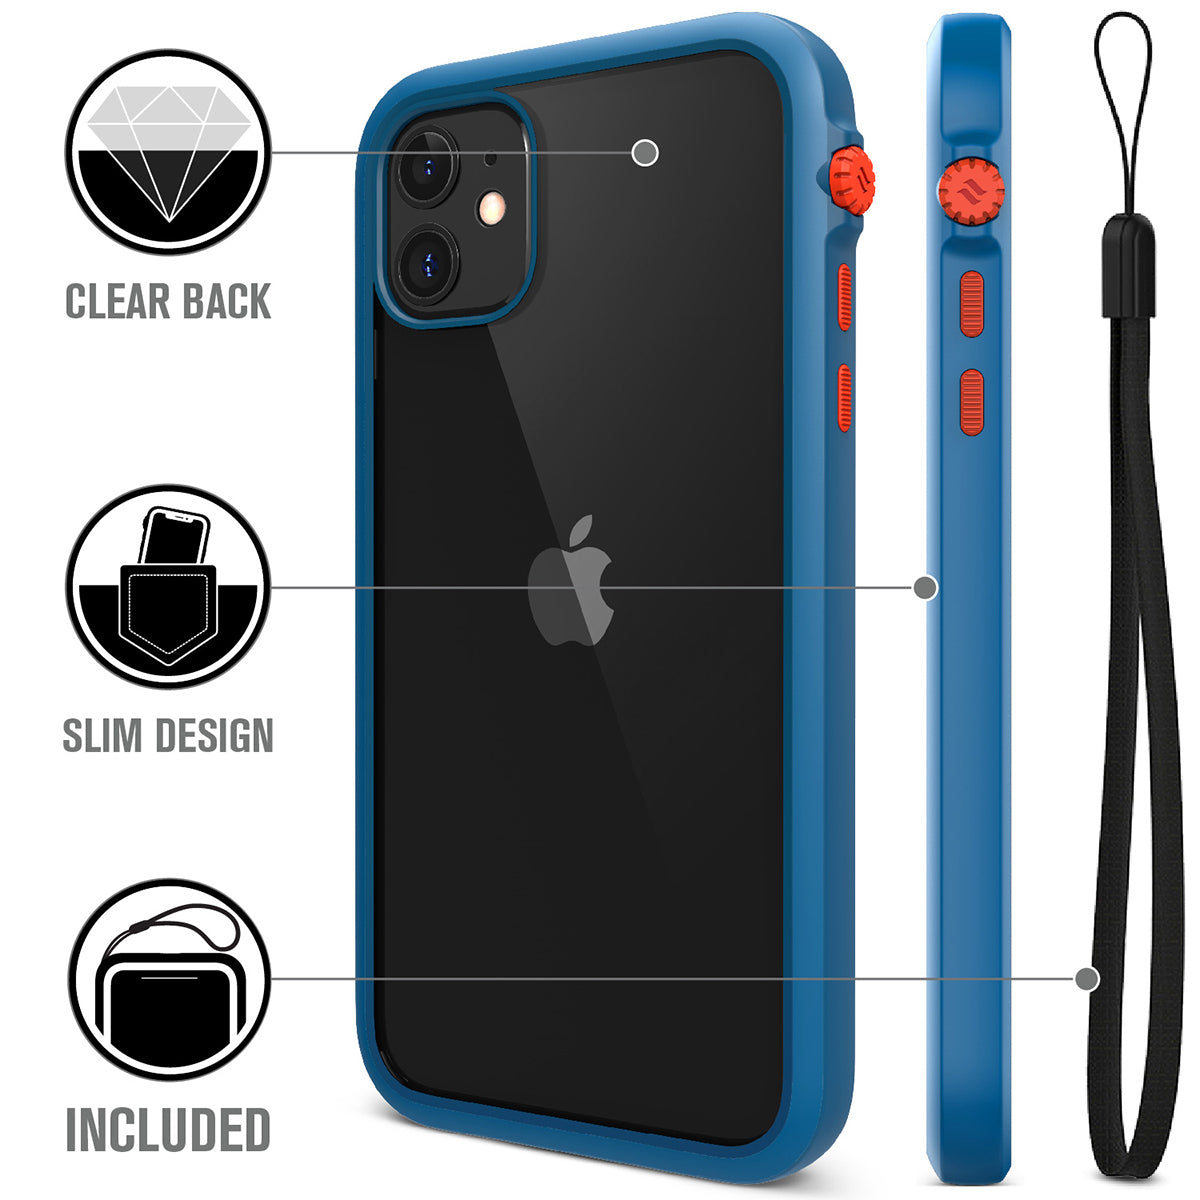 catalyst iPhone 11 series impact protection case blueridge sunset showing the back view and buttons of the case for iPhone 11 and a lanyard text reads clear back slim design included